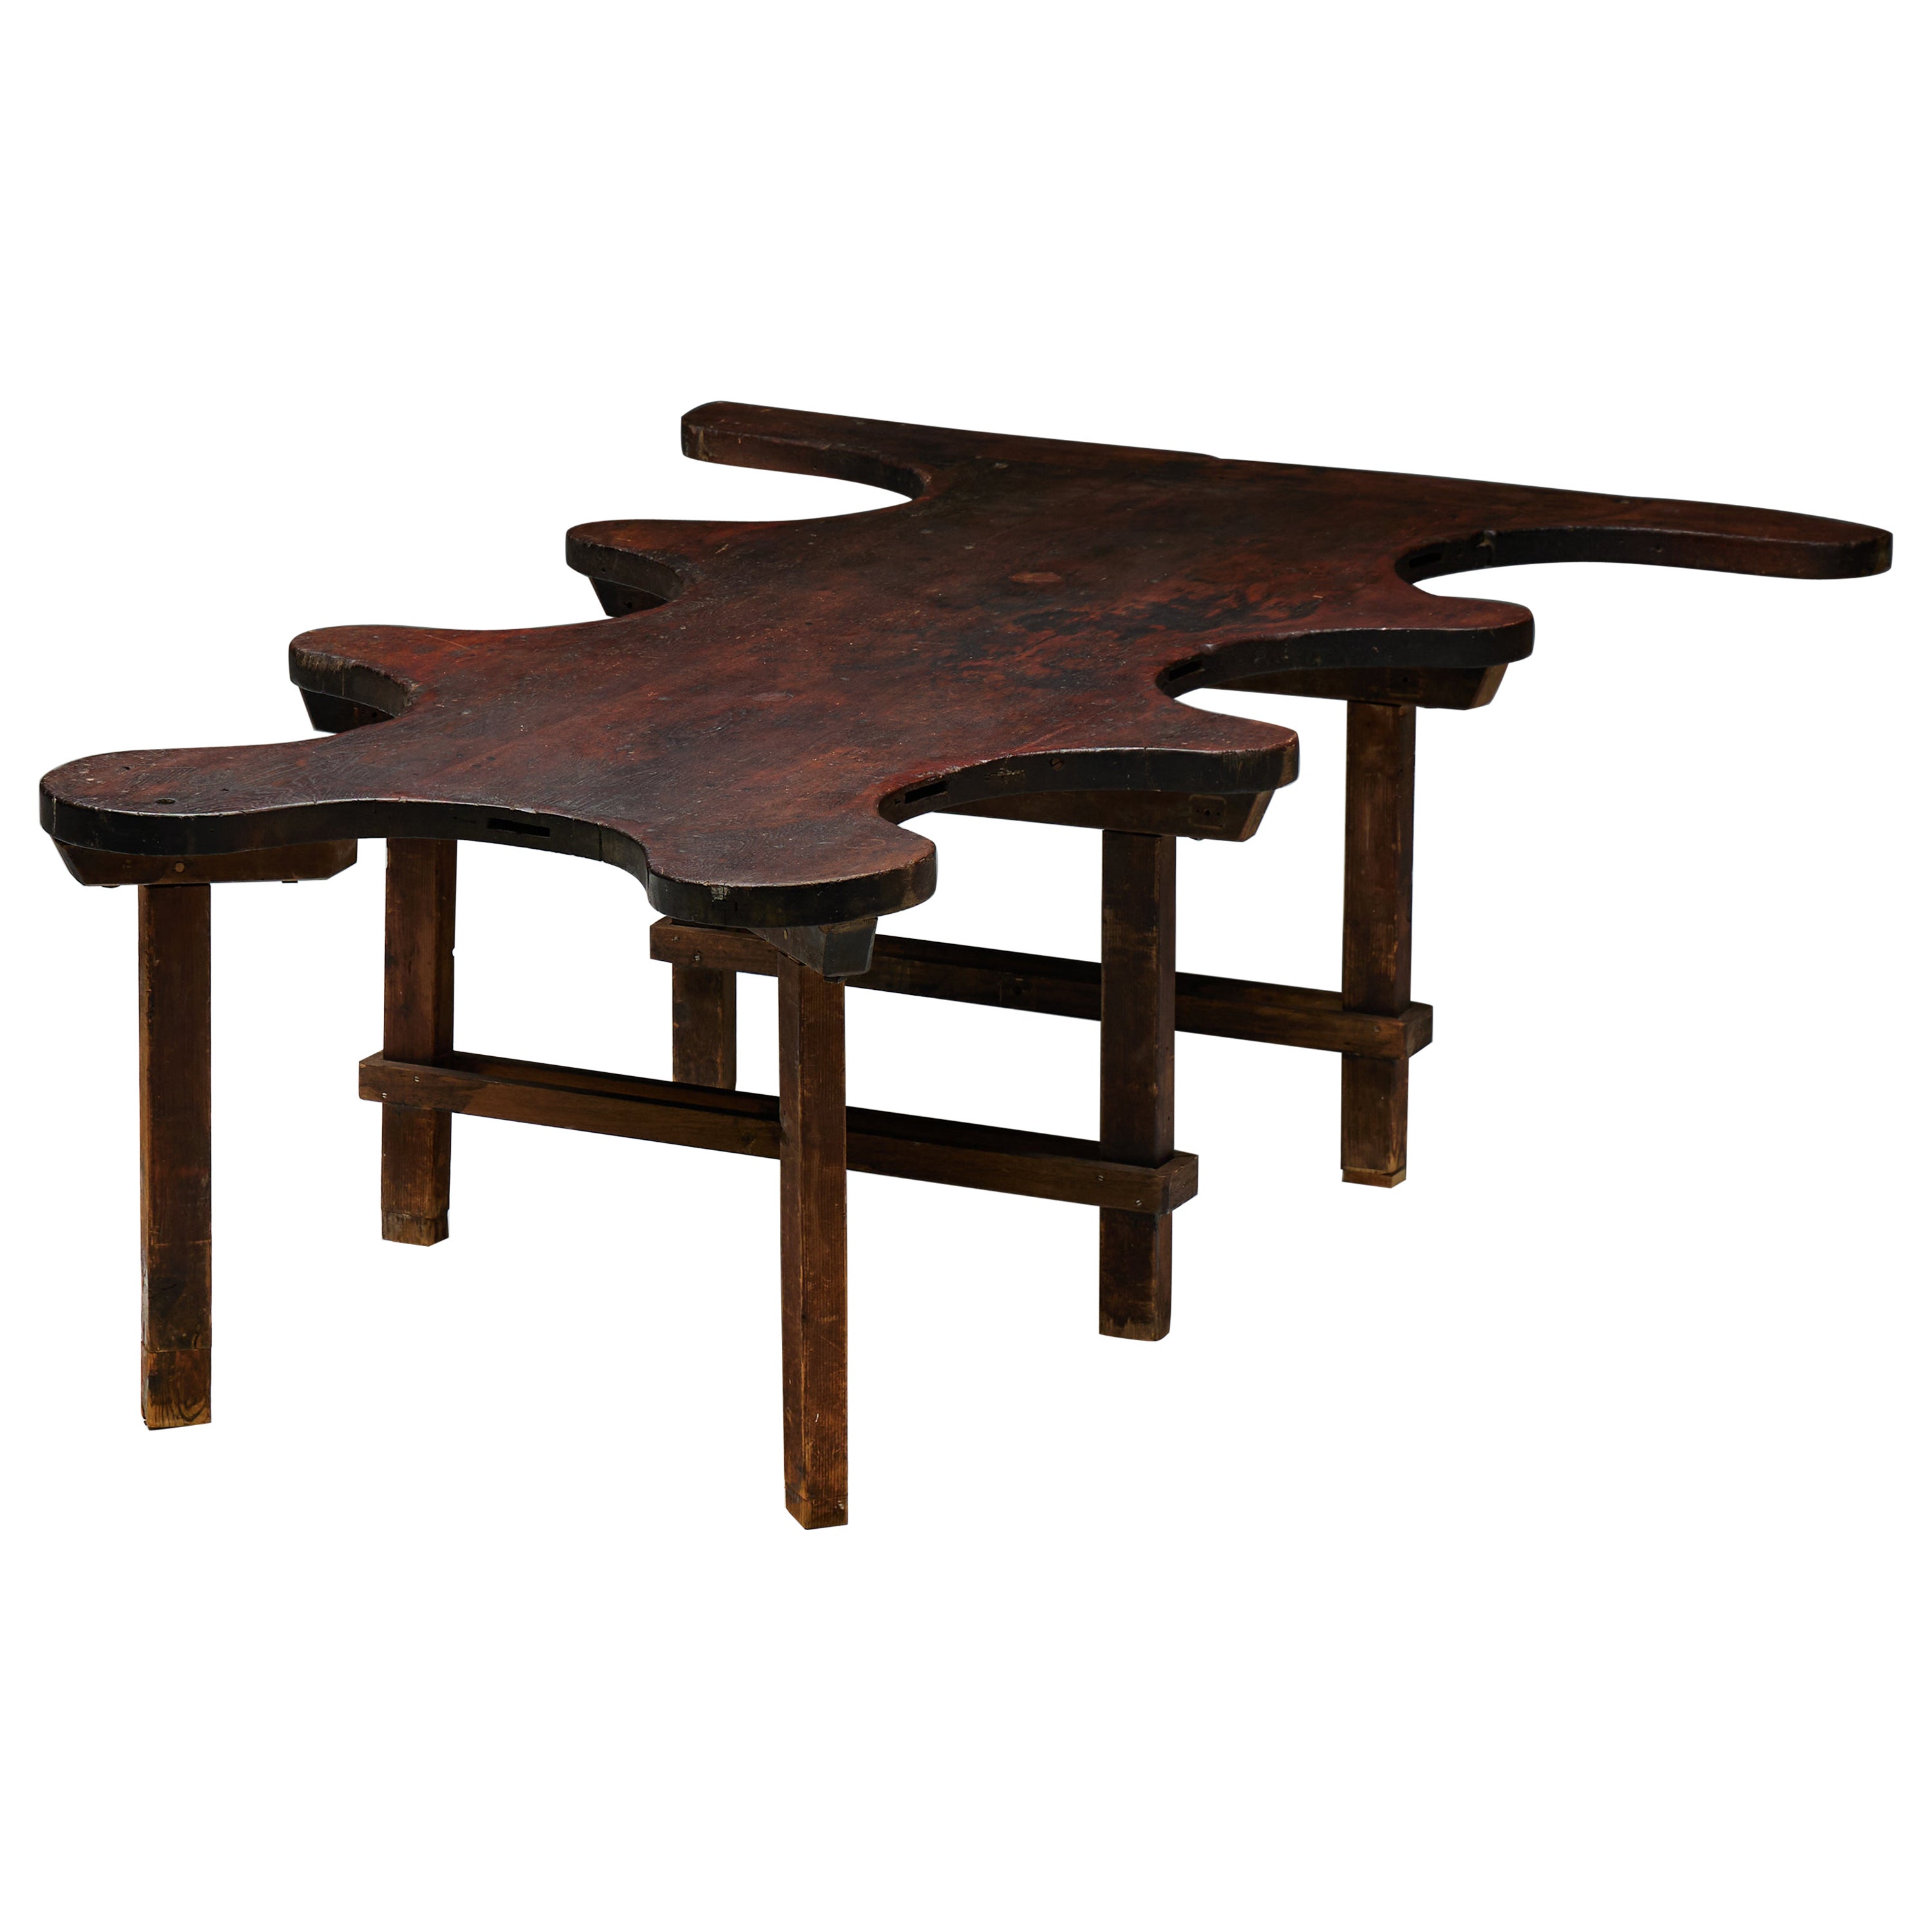 Rustic Free Form Organic Table, France, Late 19th Century For Sale